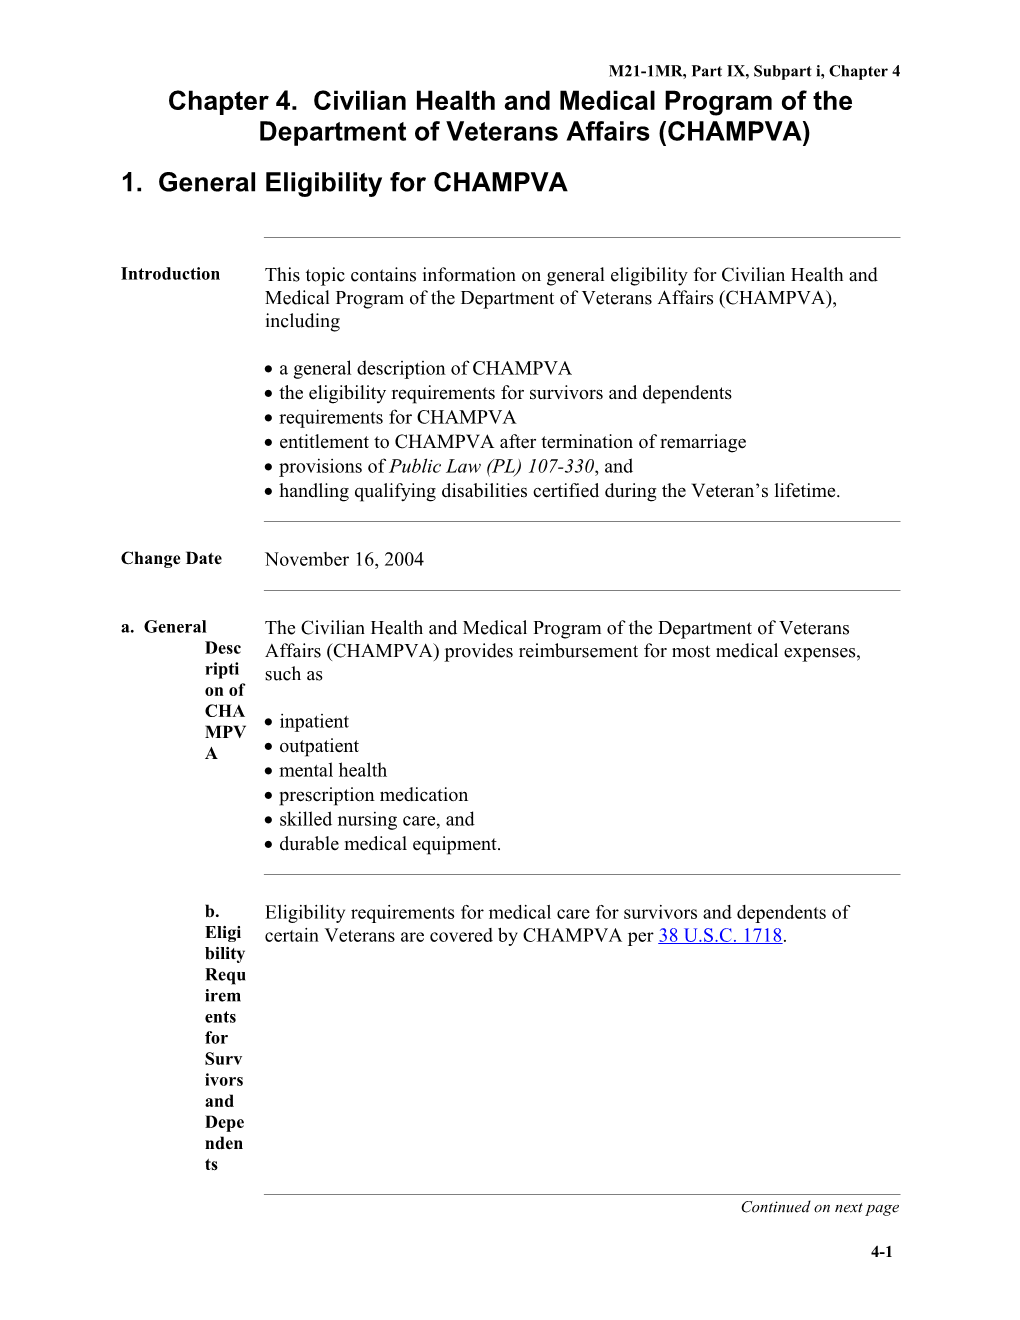 Chapter 4. Civilian Health and Medical Program of the Department of Veterans Affairs (CHAMPVA)